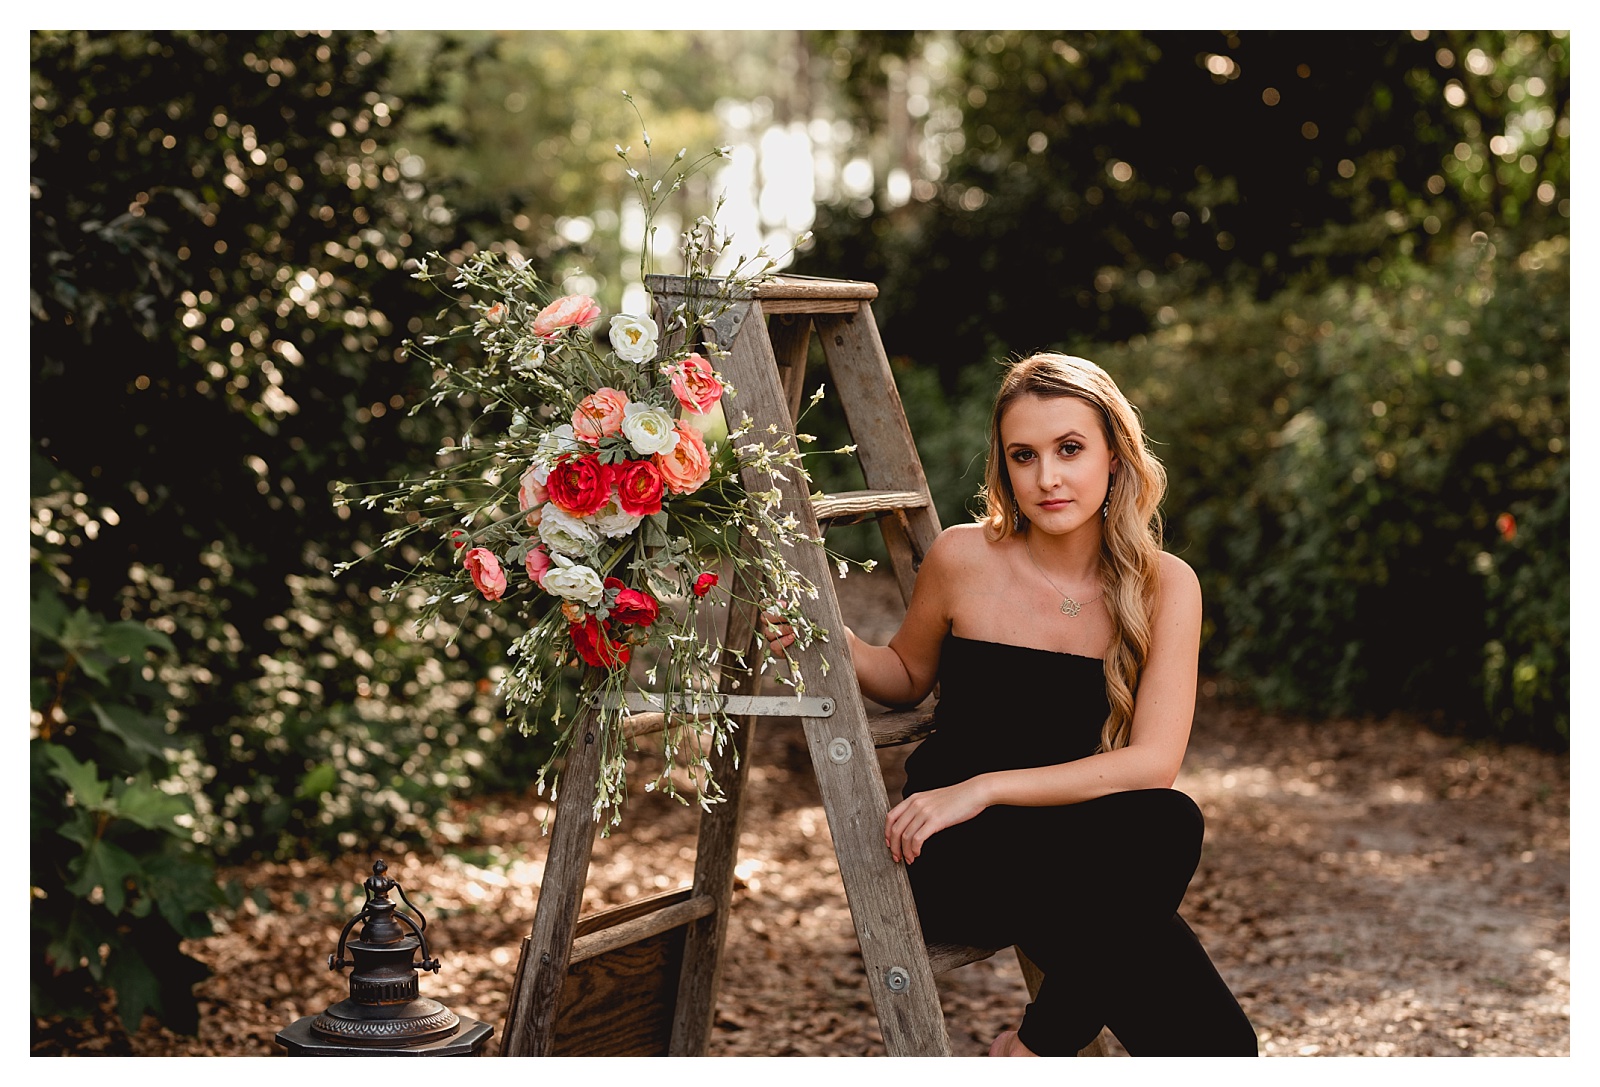 Decorative ladder with flowers used for senior photos in Tallahassee area. Shelly Williams Photography